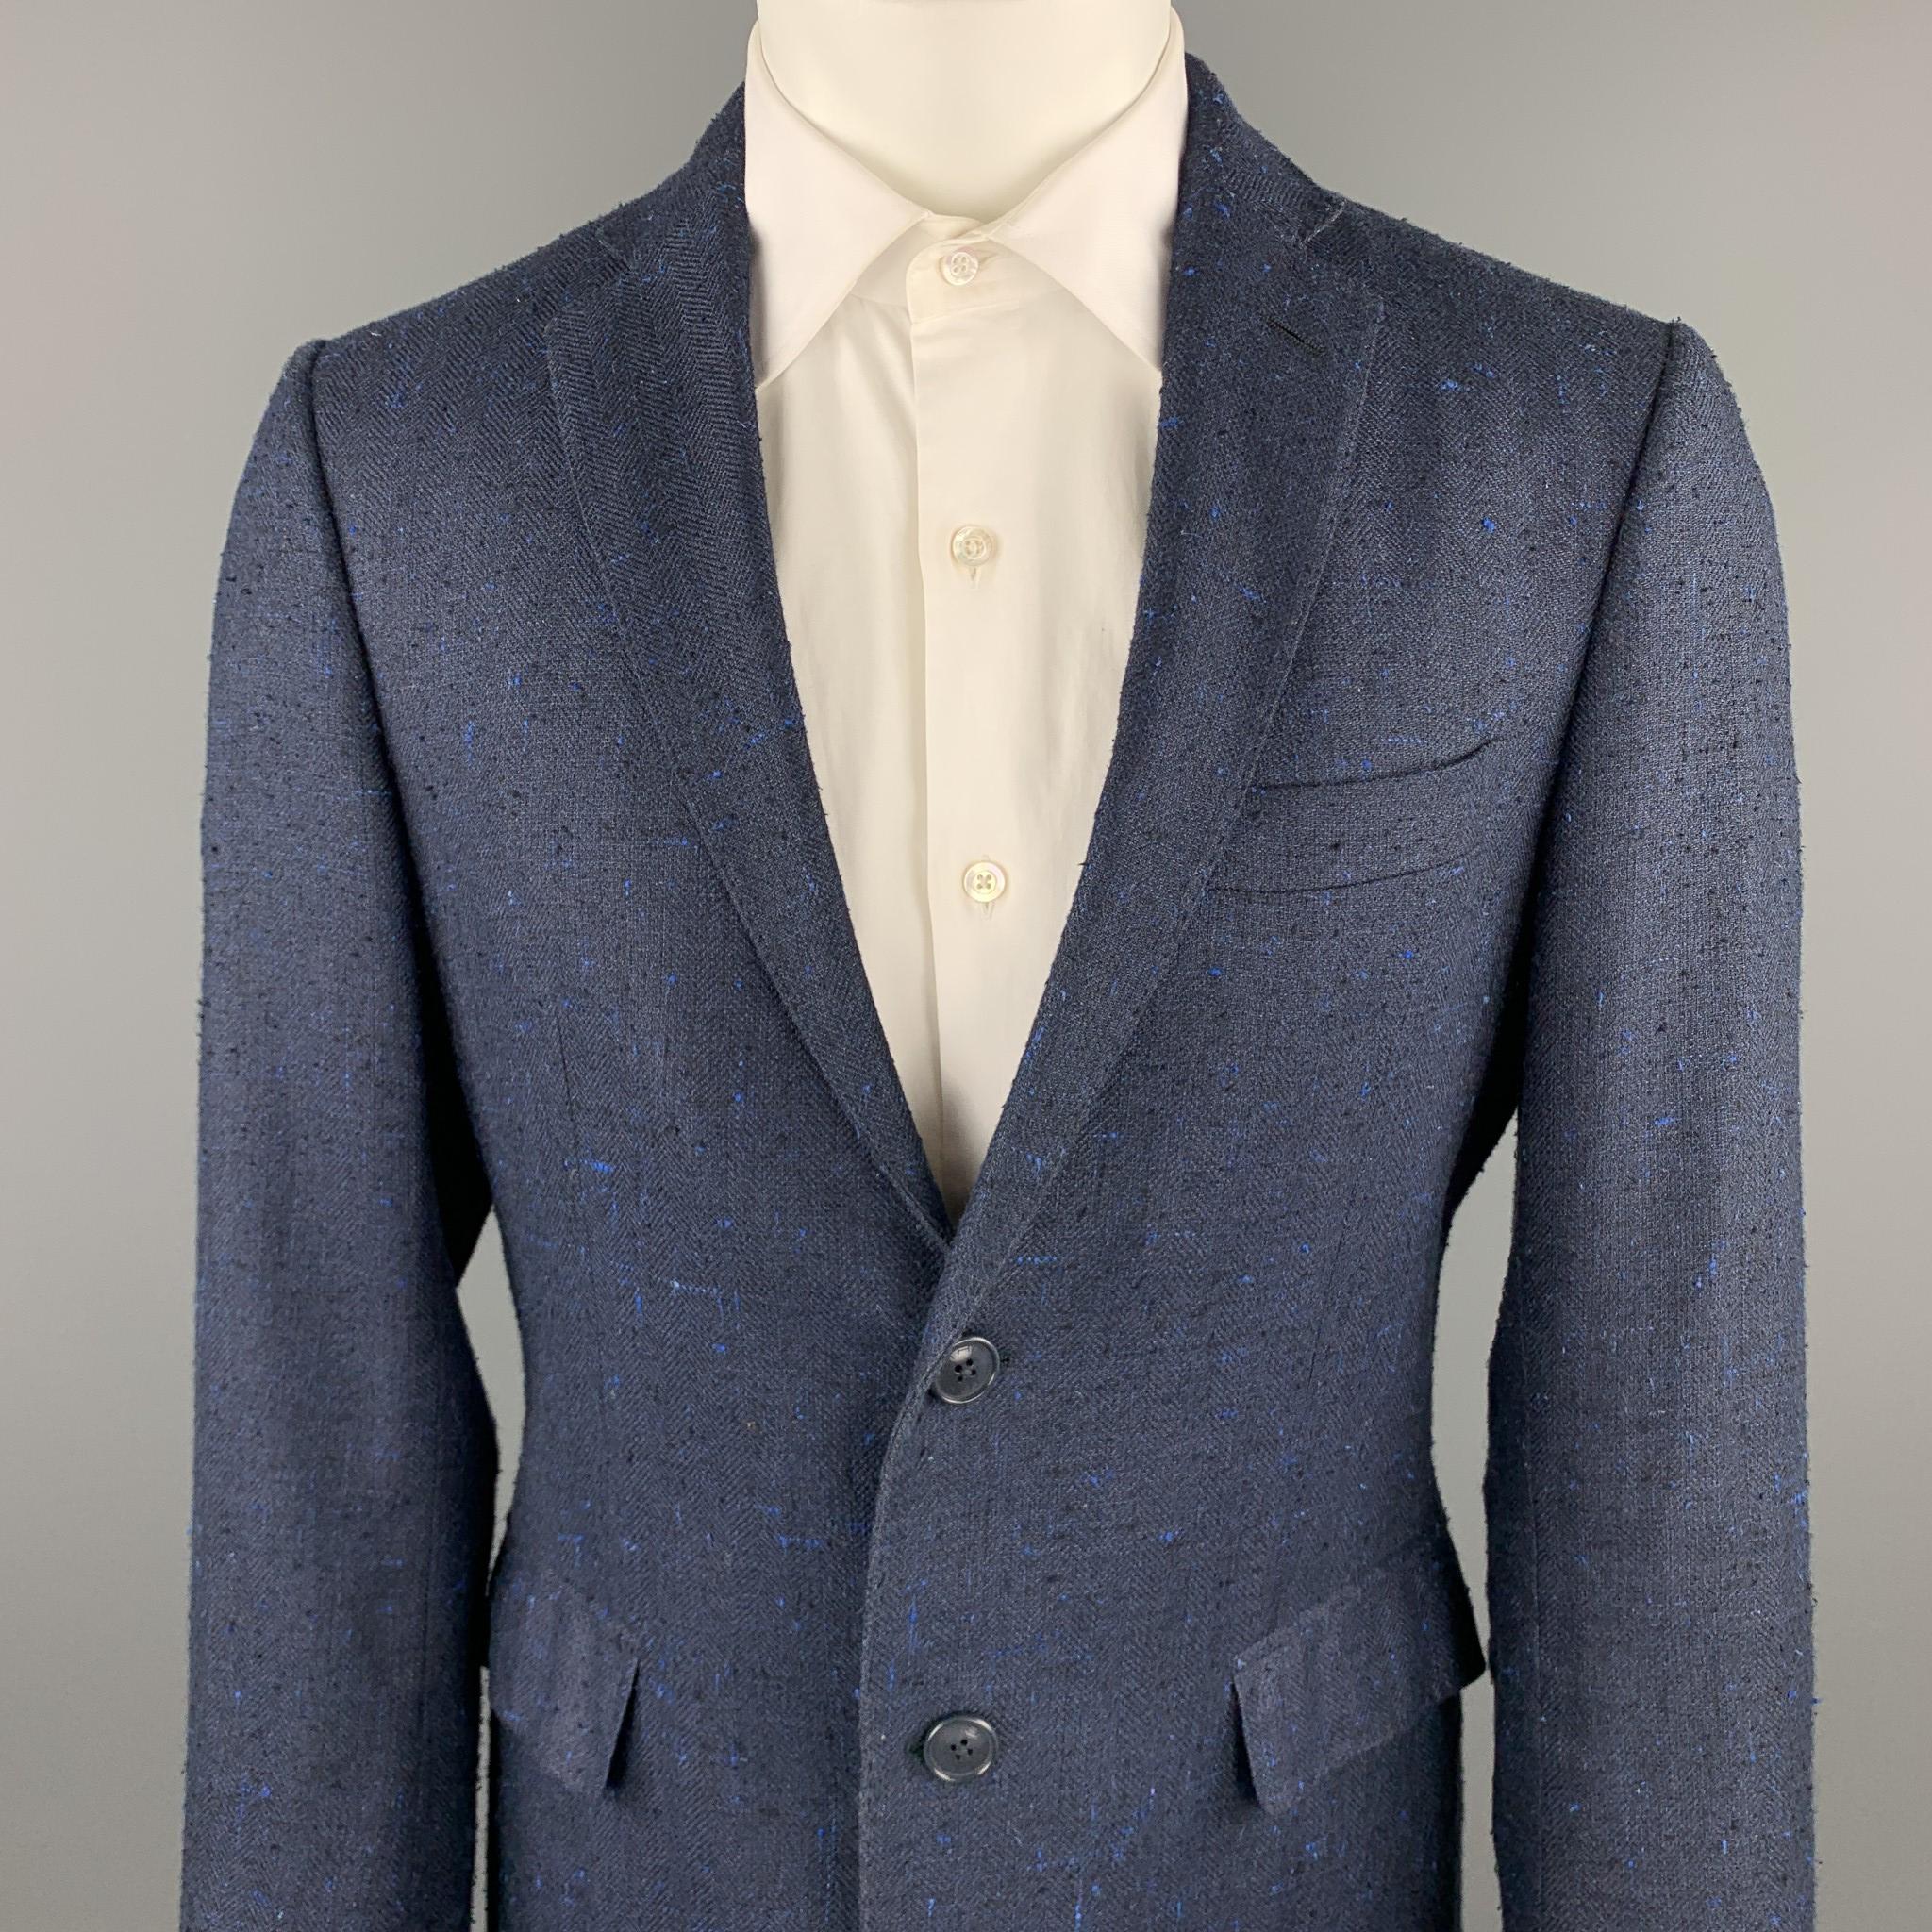 ETRO sport coat comes in a navy textured silk / linen featuring a notch lapel, paisley print liner, flap pockets, and a two button closure. Made in Italy.

Excellent Pre-Owned Condition.
Marked: IT 50

Measurements:

Shoulder: 17 in.
Chest: 40 in.